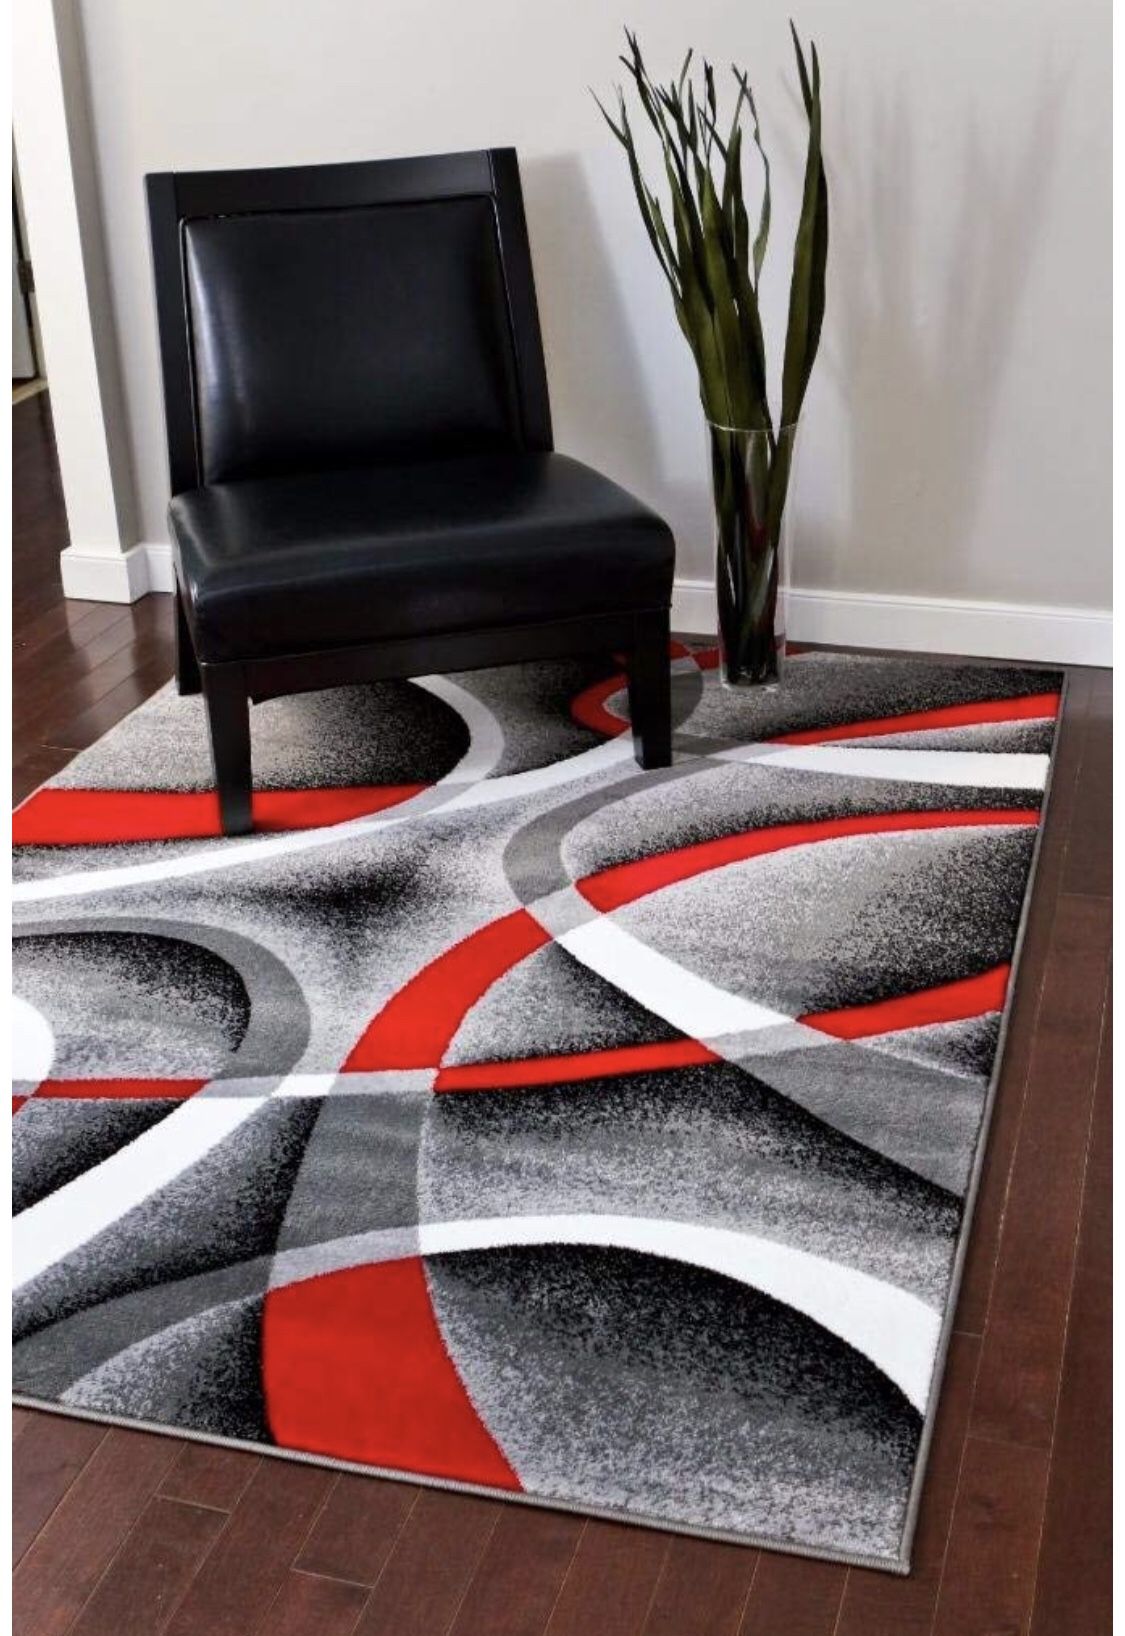 Area Rug Gray Black Red White Swirls 5'2 x7'2 Modern Abstract Area Rug Carpet Large Kitchen Bed Room Desk Chair Lamp